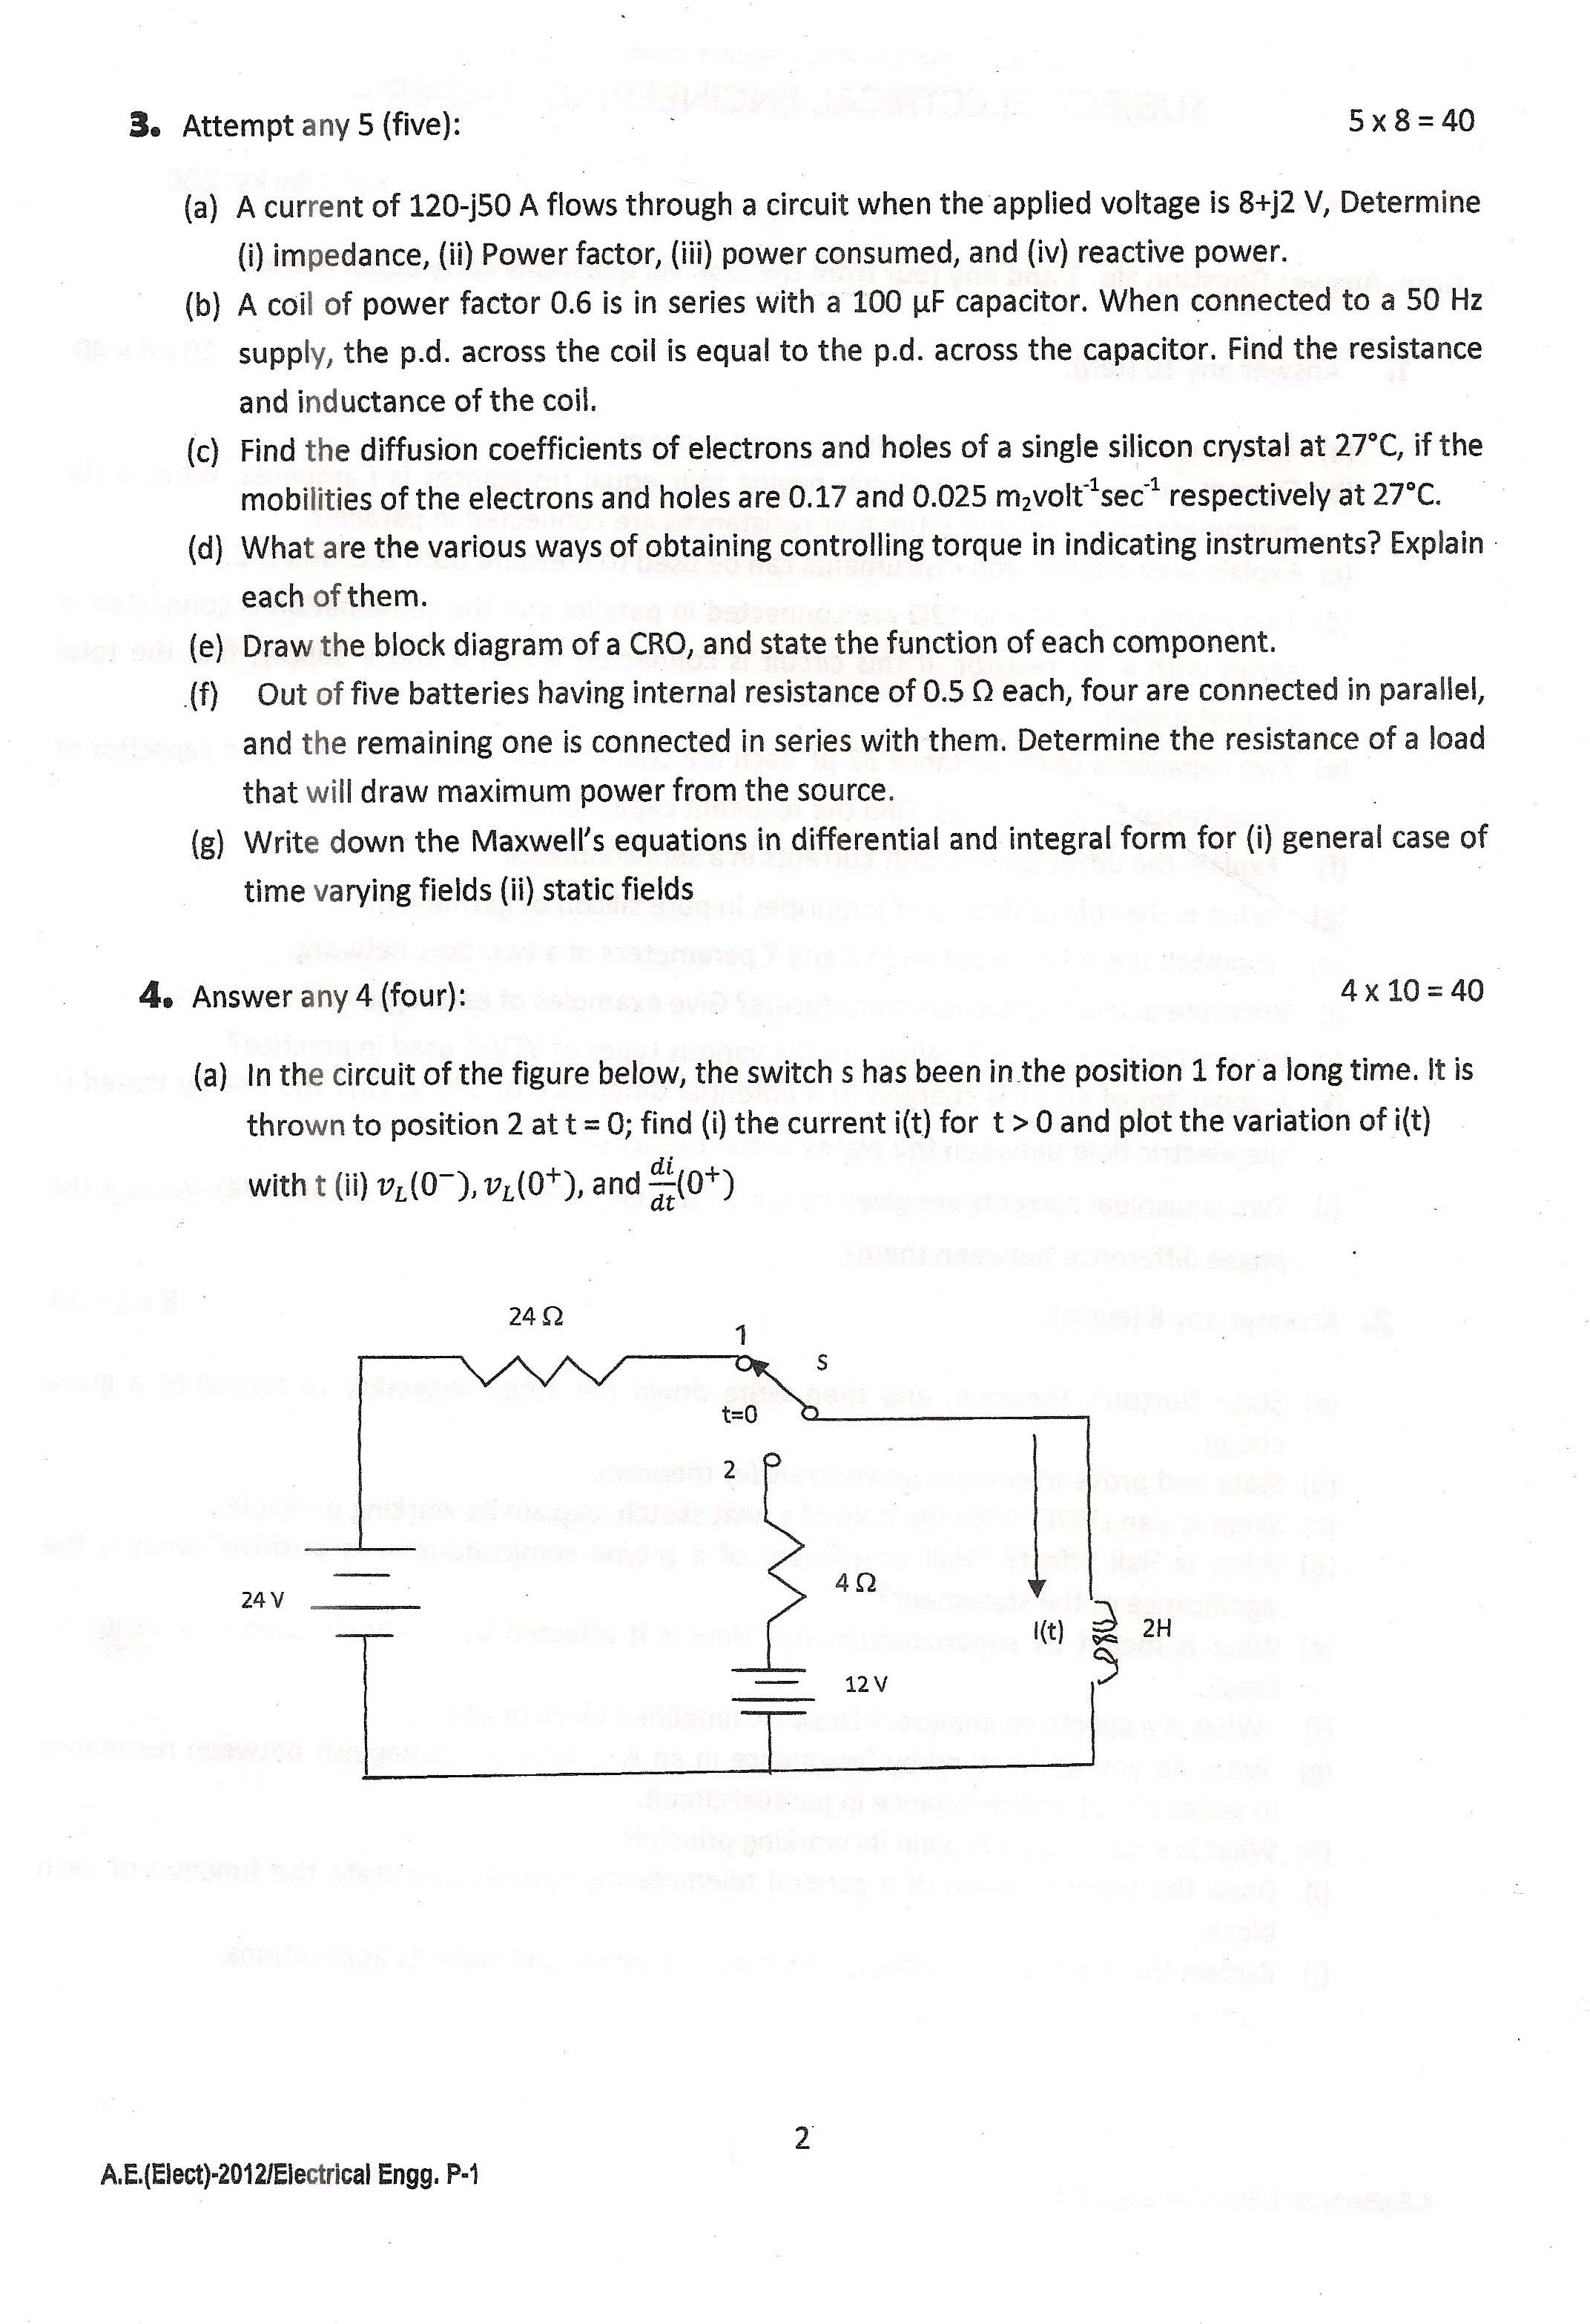 APPSC AE Electrical Exam 2012 Electrical Engineering Paper I 2